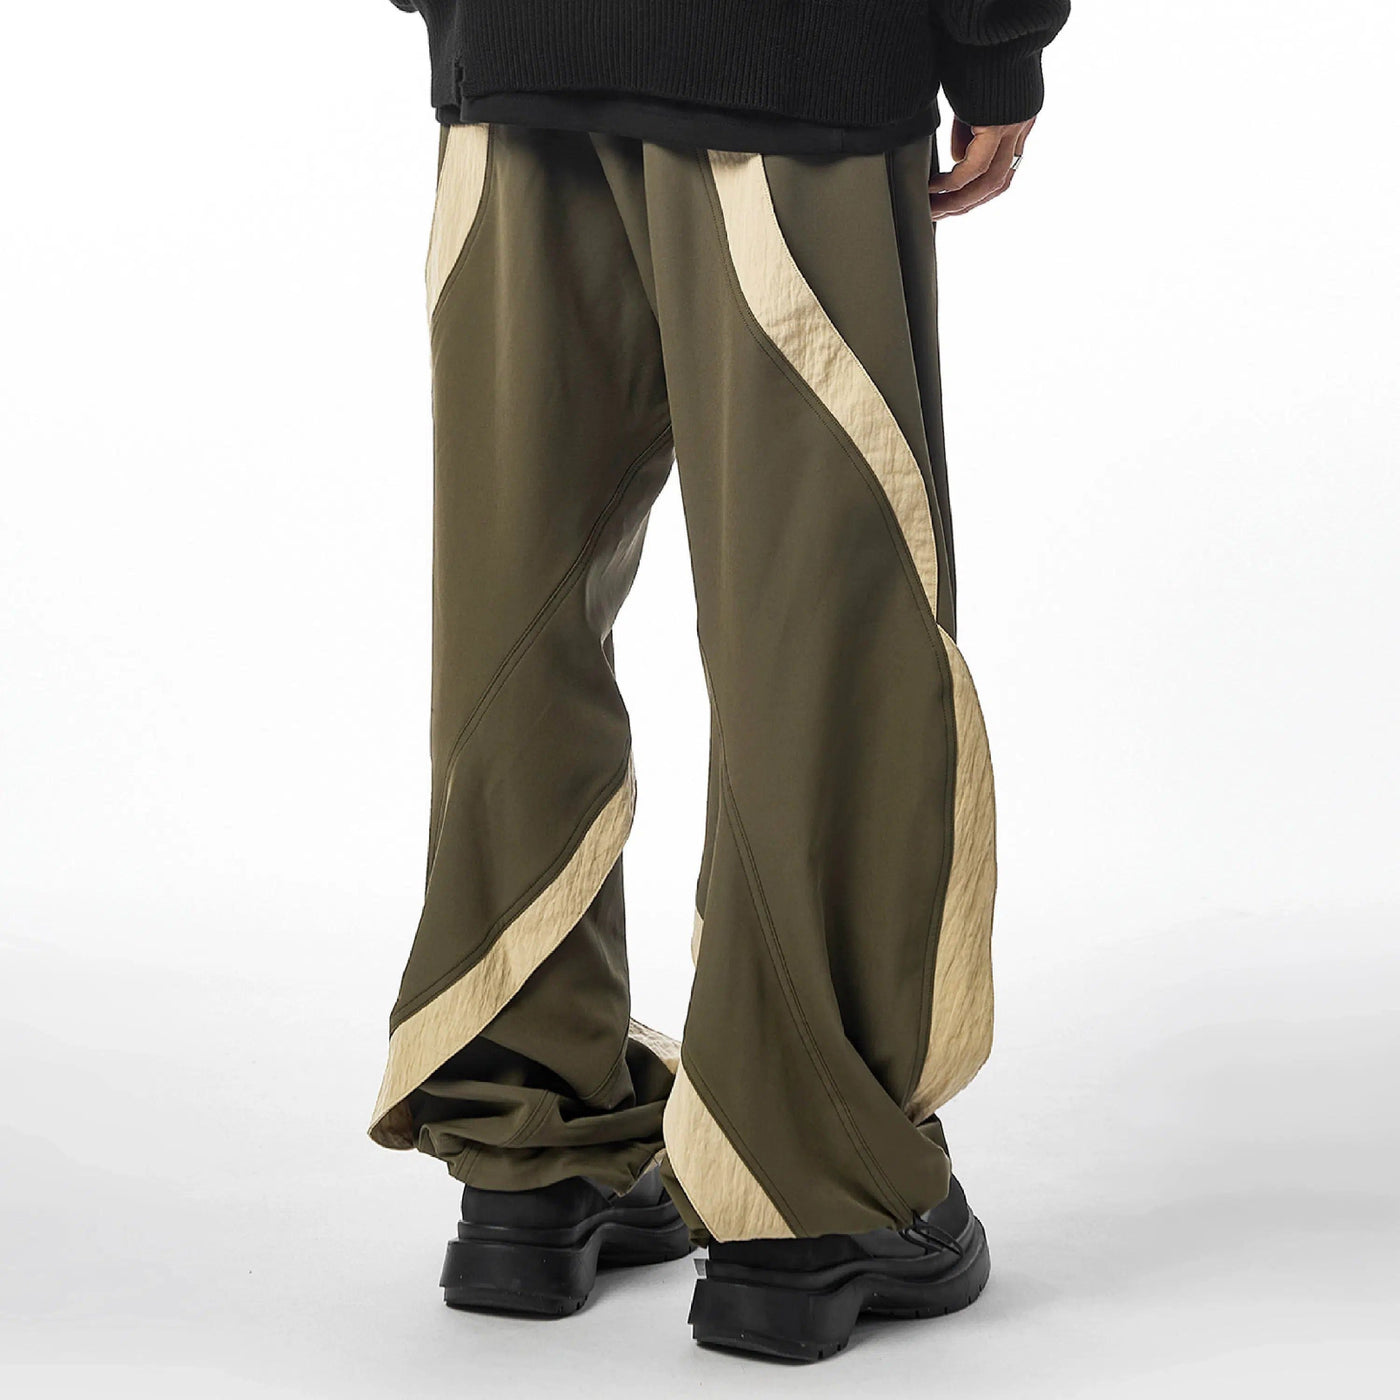 Swirling Contrast Line Track Pants Korean Street Fashion Pants By Symbiotic Effect Shop Online at OH Vault